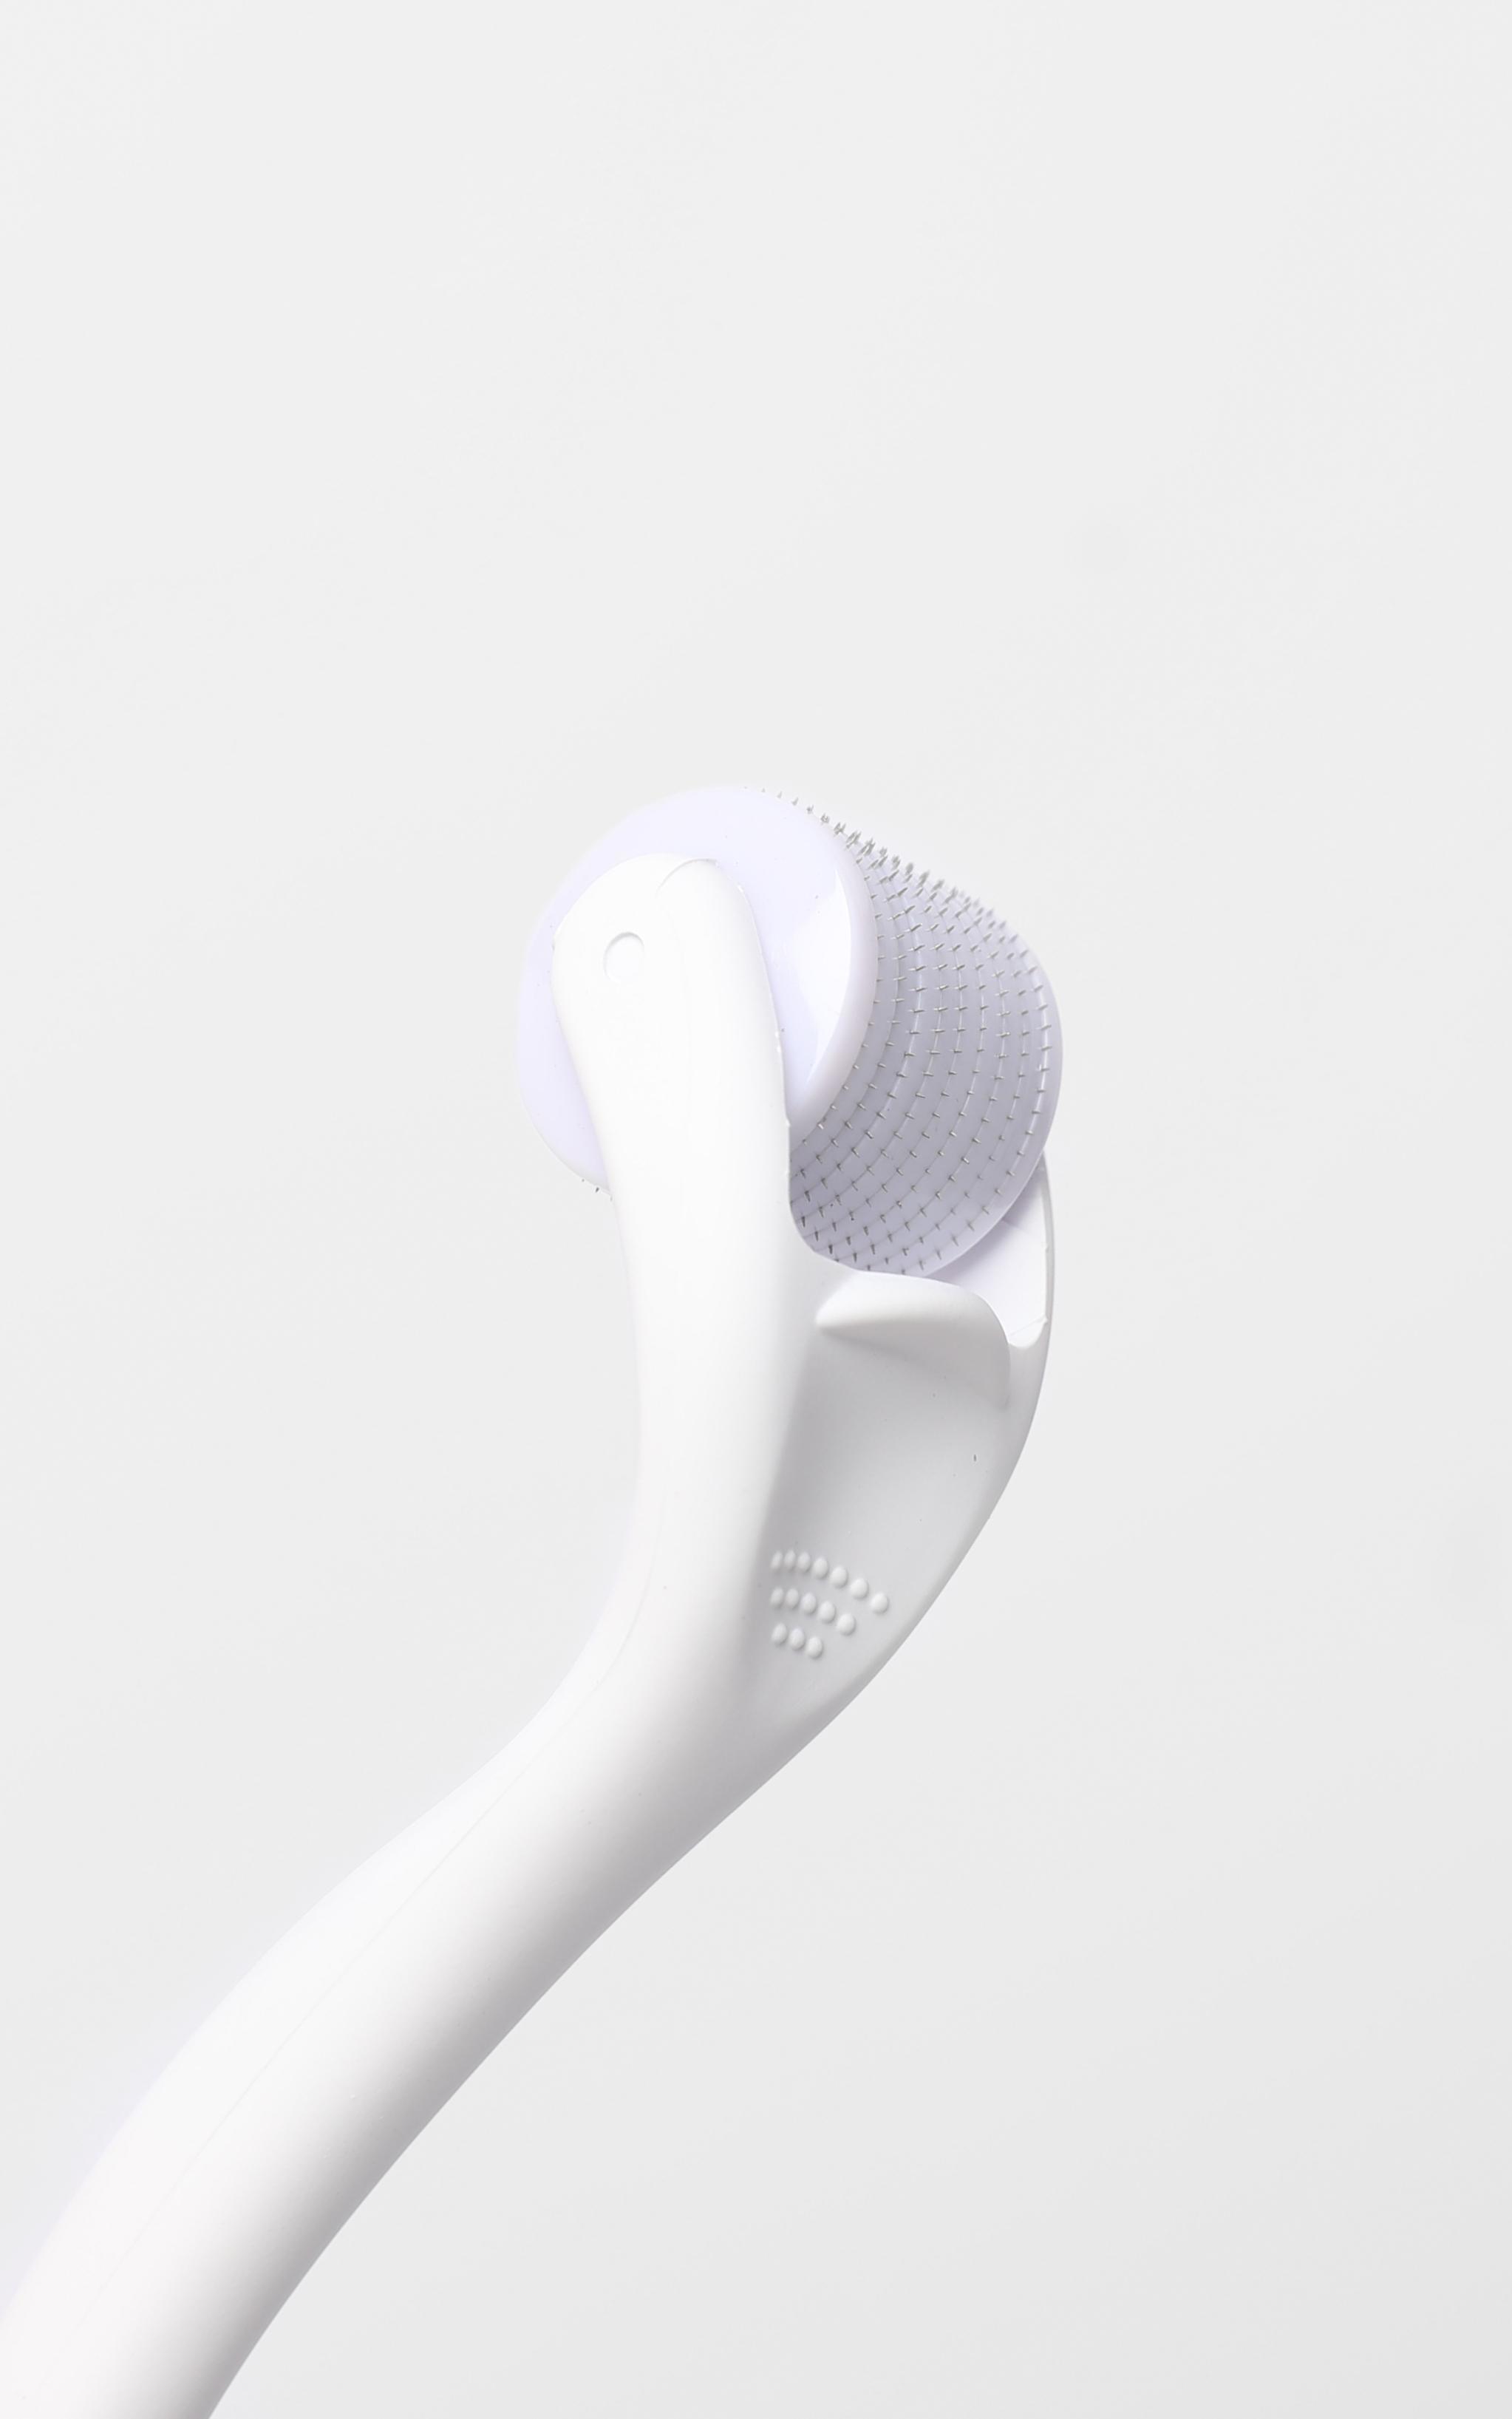 Micro Glow - Derma Roller in White, WHT3, hi-res image number null